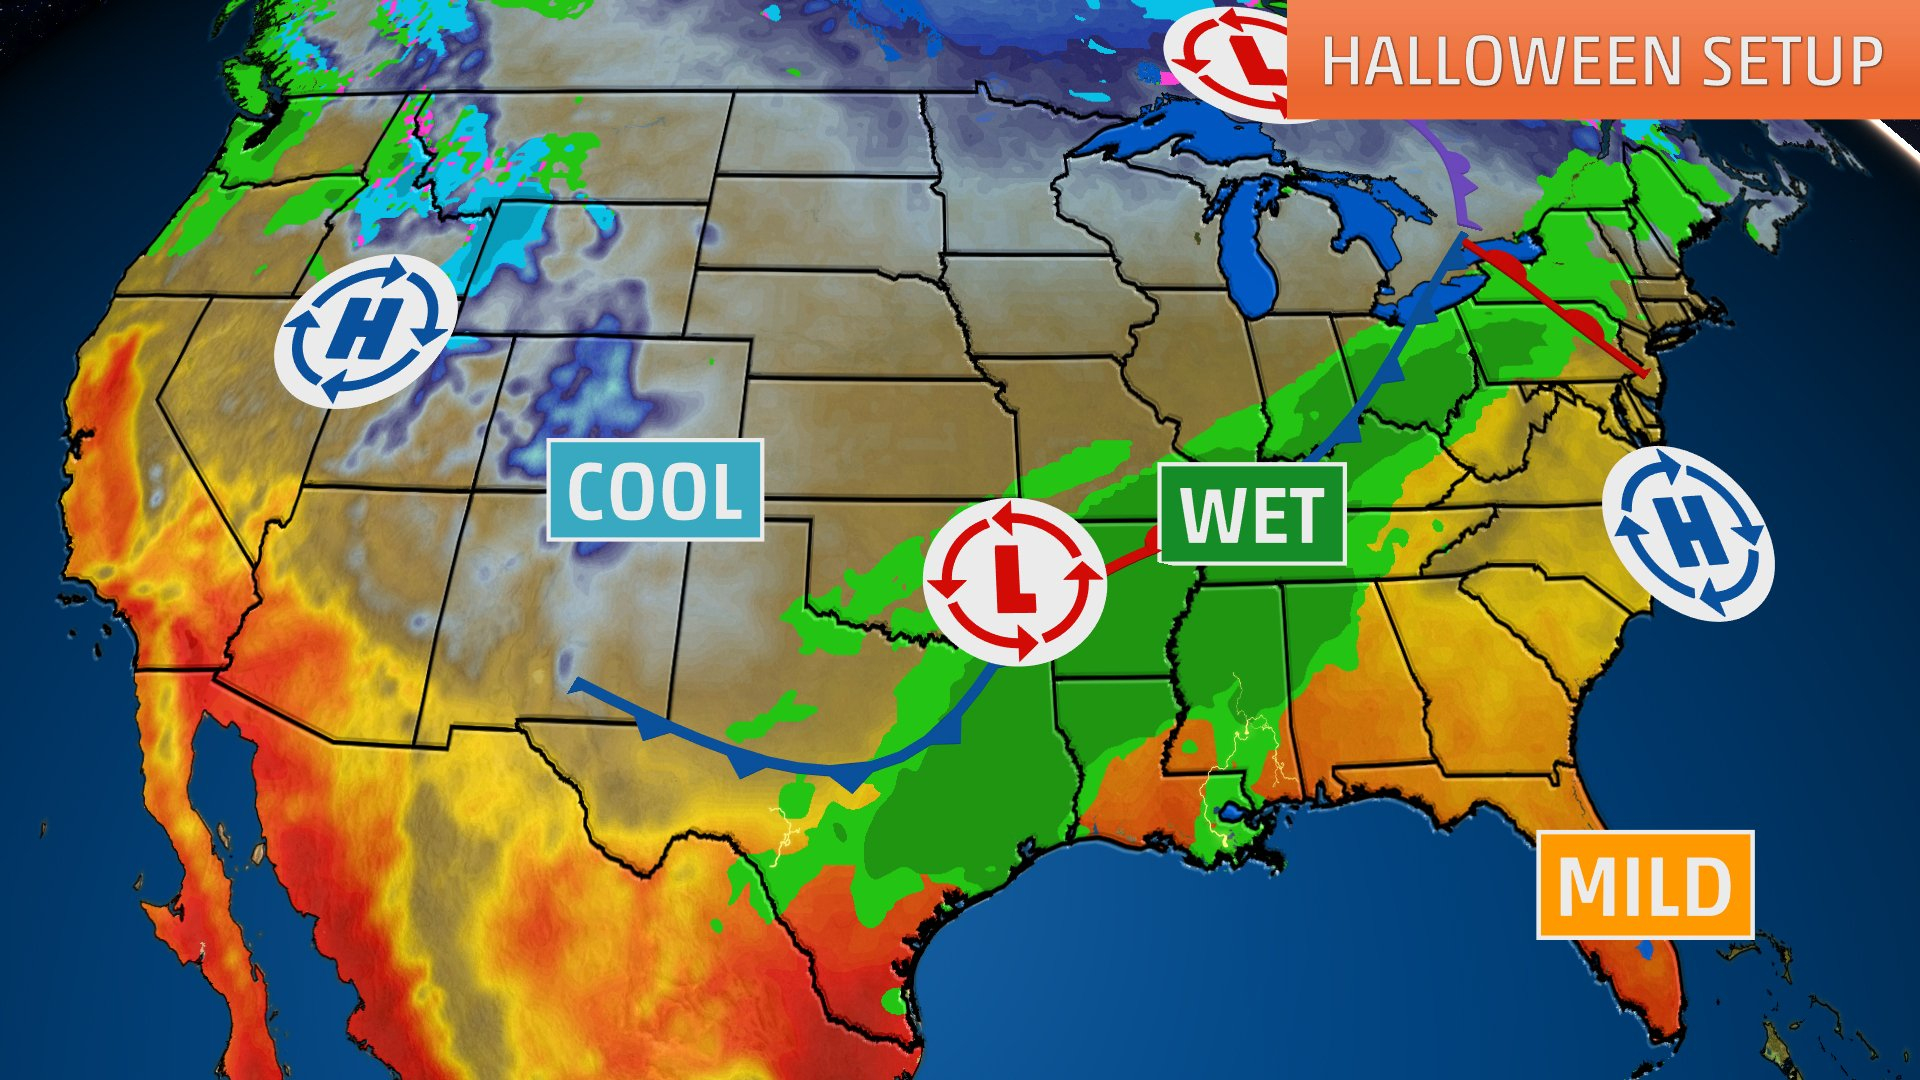 Halloween Weather Forecast: Wet Conditions From Texas To Ohio Valley - Texas Weather Map